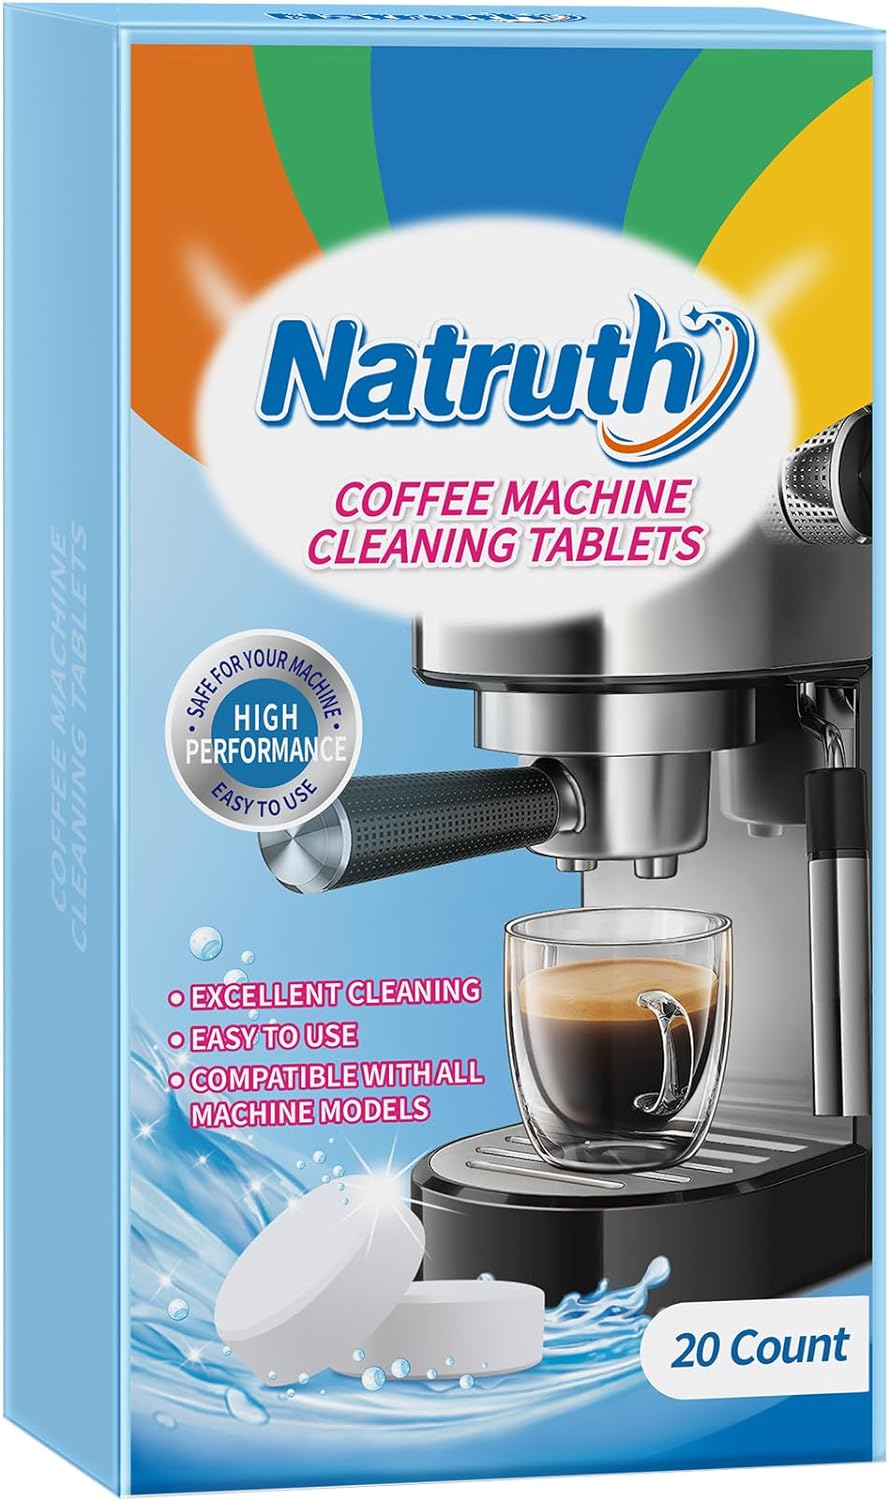 I have an espresso machine that I use every morning, and lately I have been feeling like my coffee just doesn't taste as good as when I first got the machine. I was thinking maybe I'm just getting bored of the espresso and needed to change brands or even type of coffee. I used one of these tablets and cleaned my machine, and now my coffee tastes just like it did the day I made my first cup. This worked great.